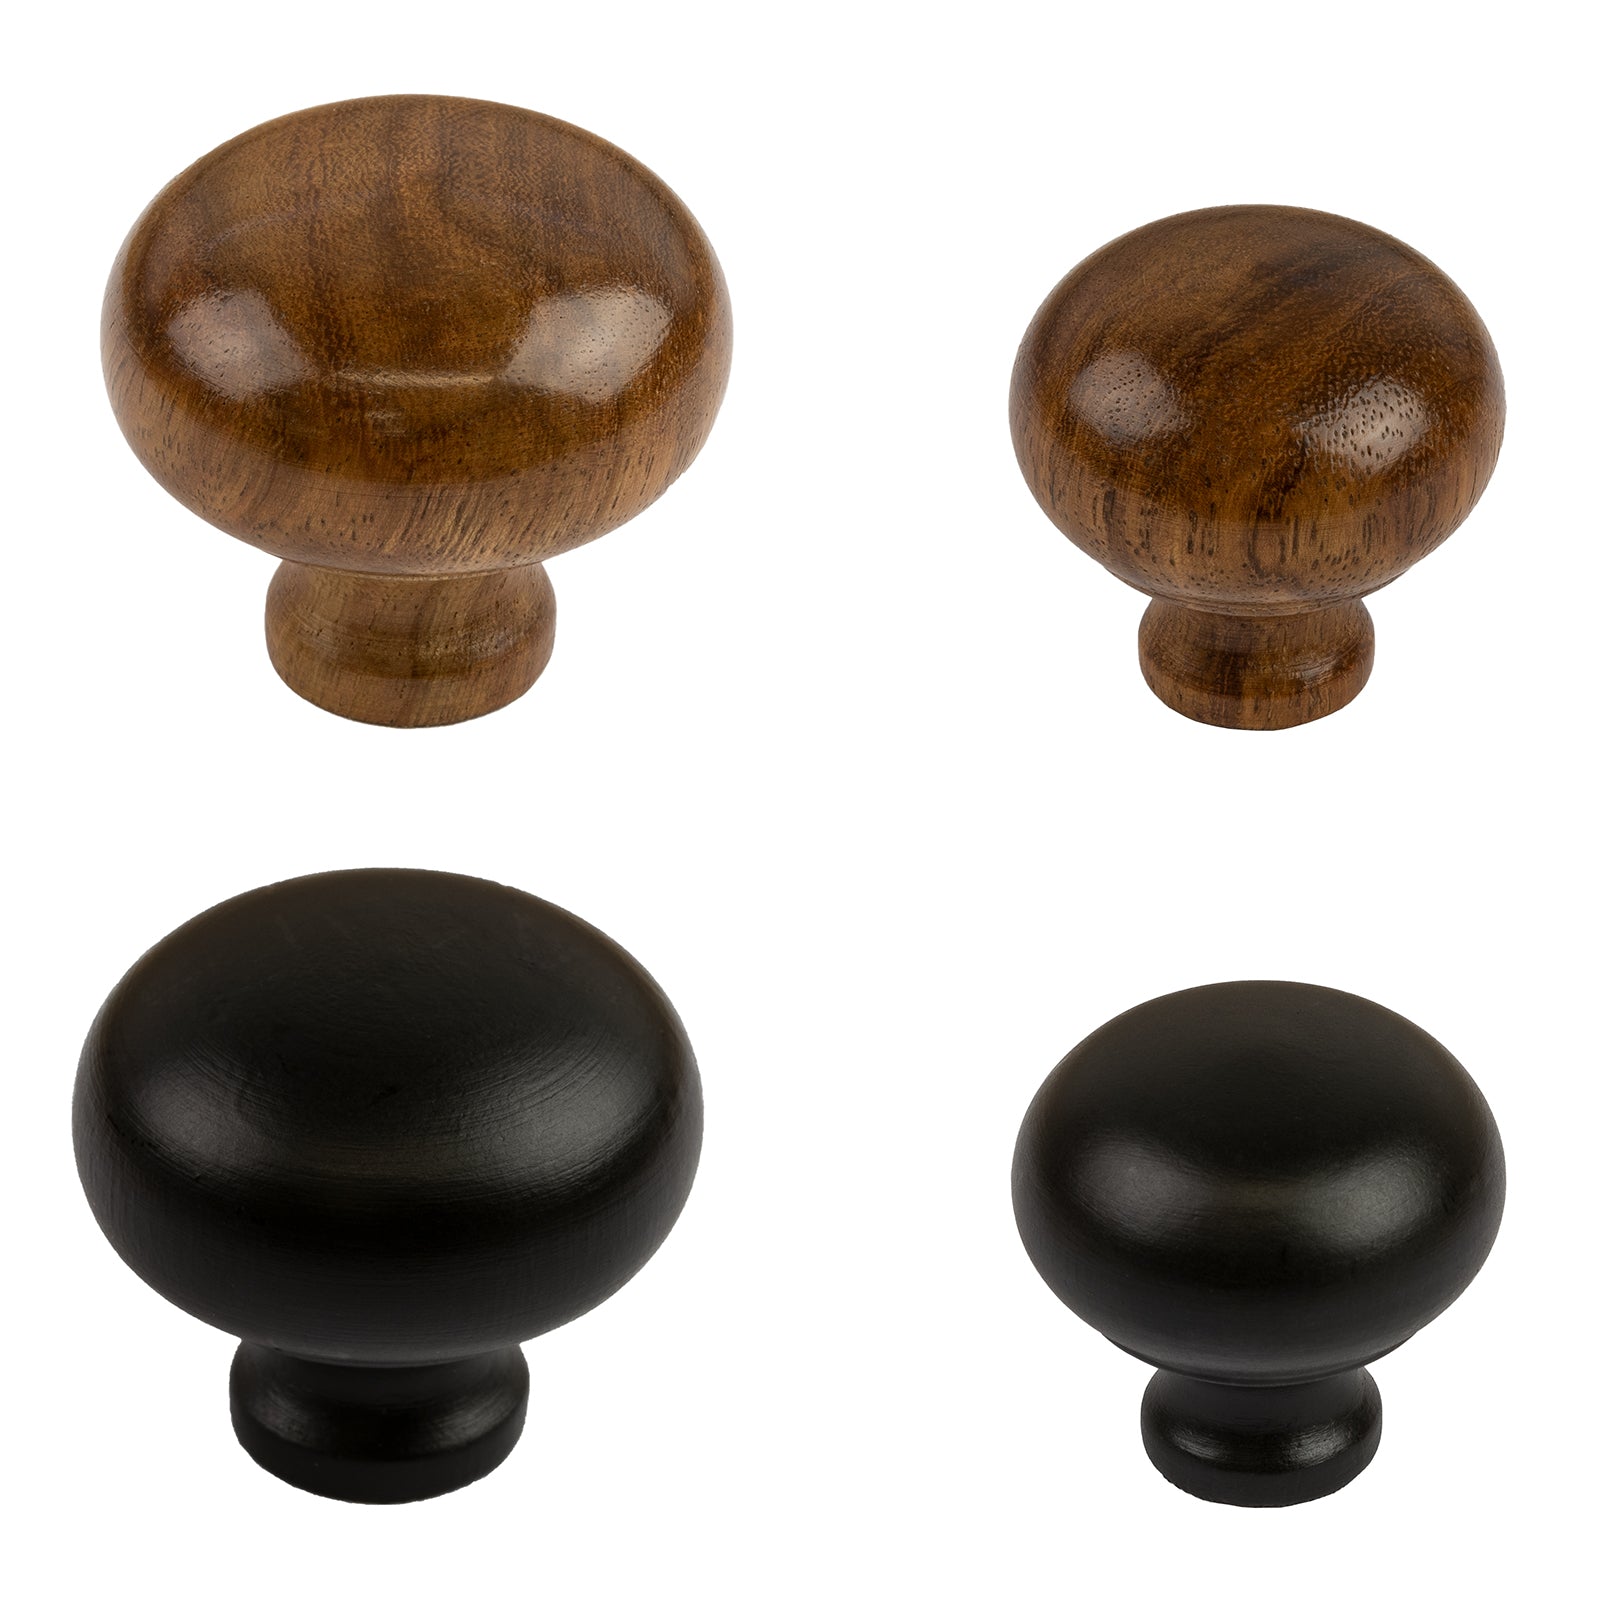 Bun Cabinet Door Knobs in Rosewood and Ebonised Finish